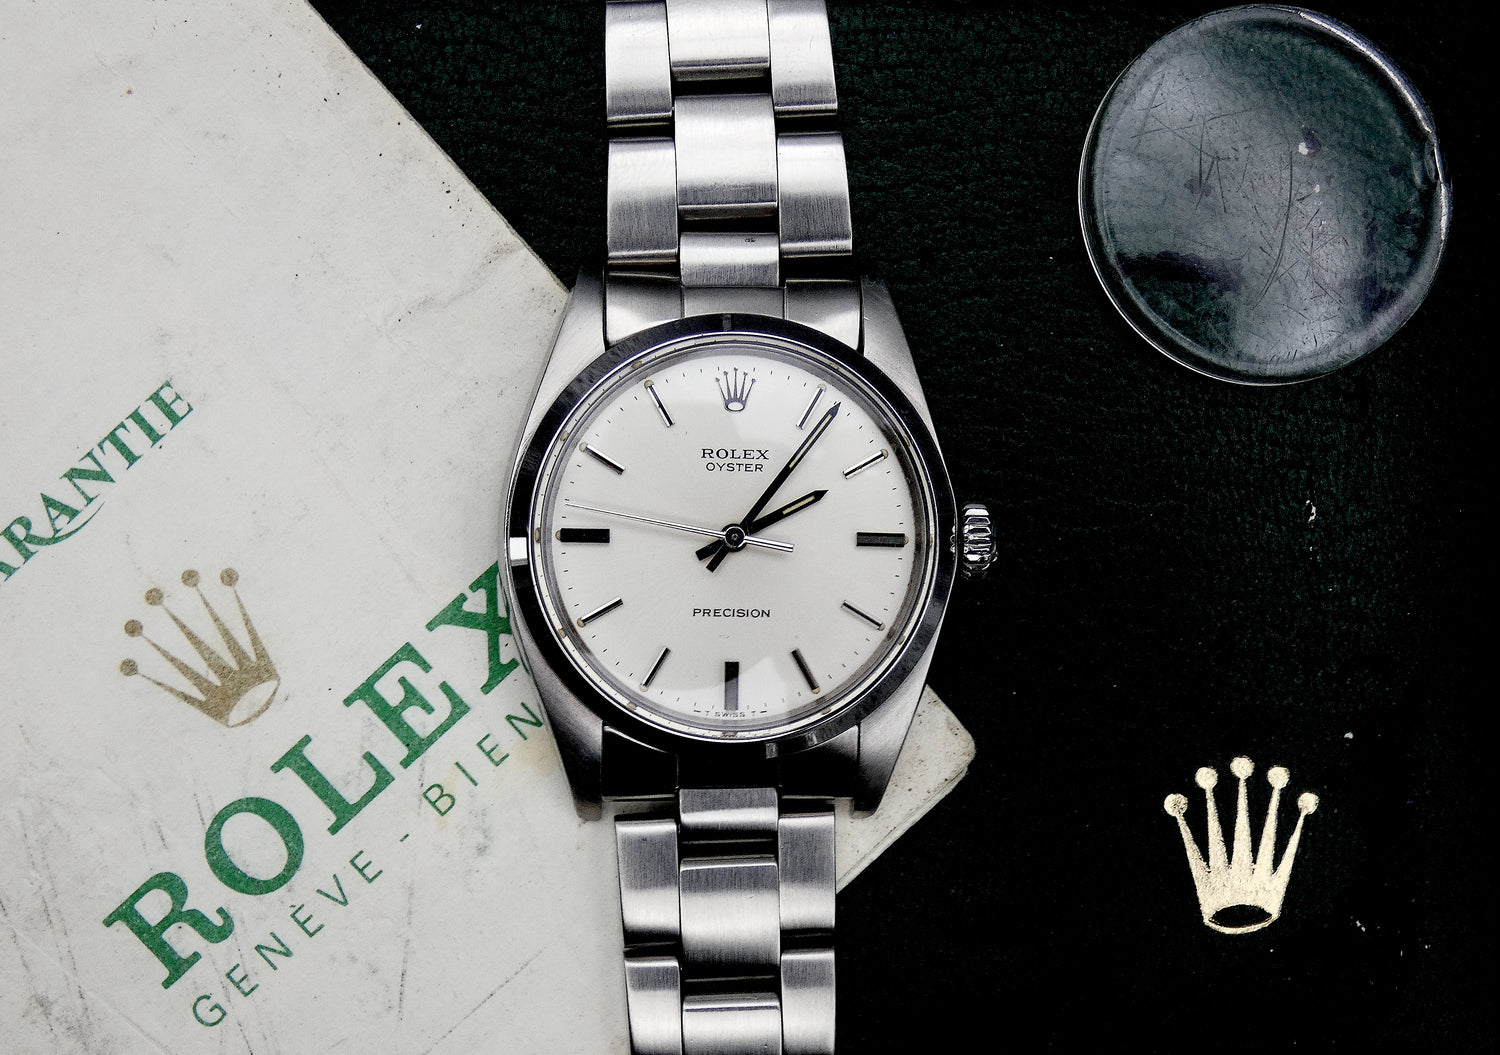 SOLD Rolex Oyster Precision 6426 B&P - overhauled/serviced - great condition